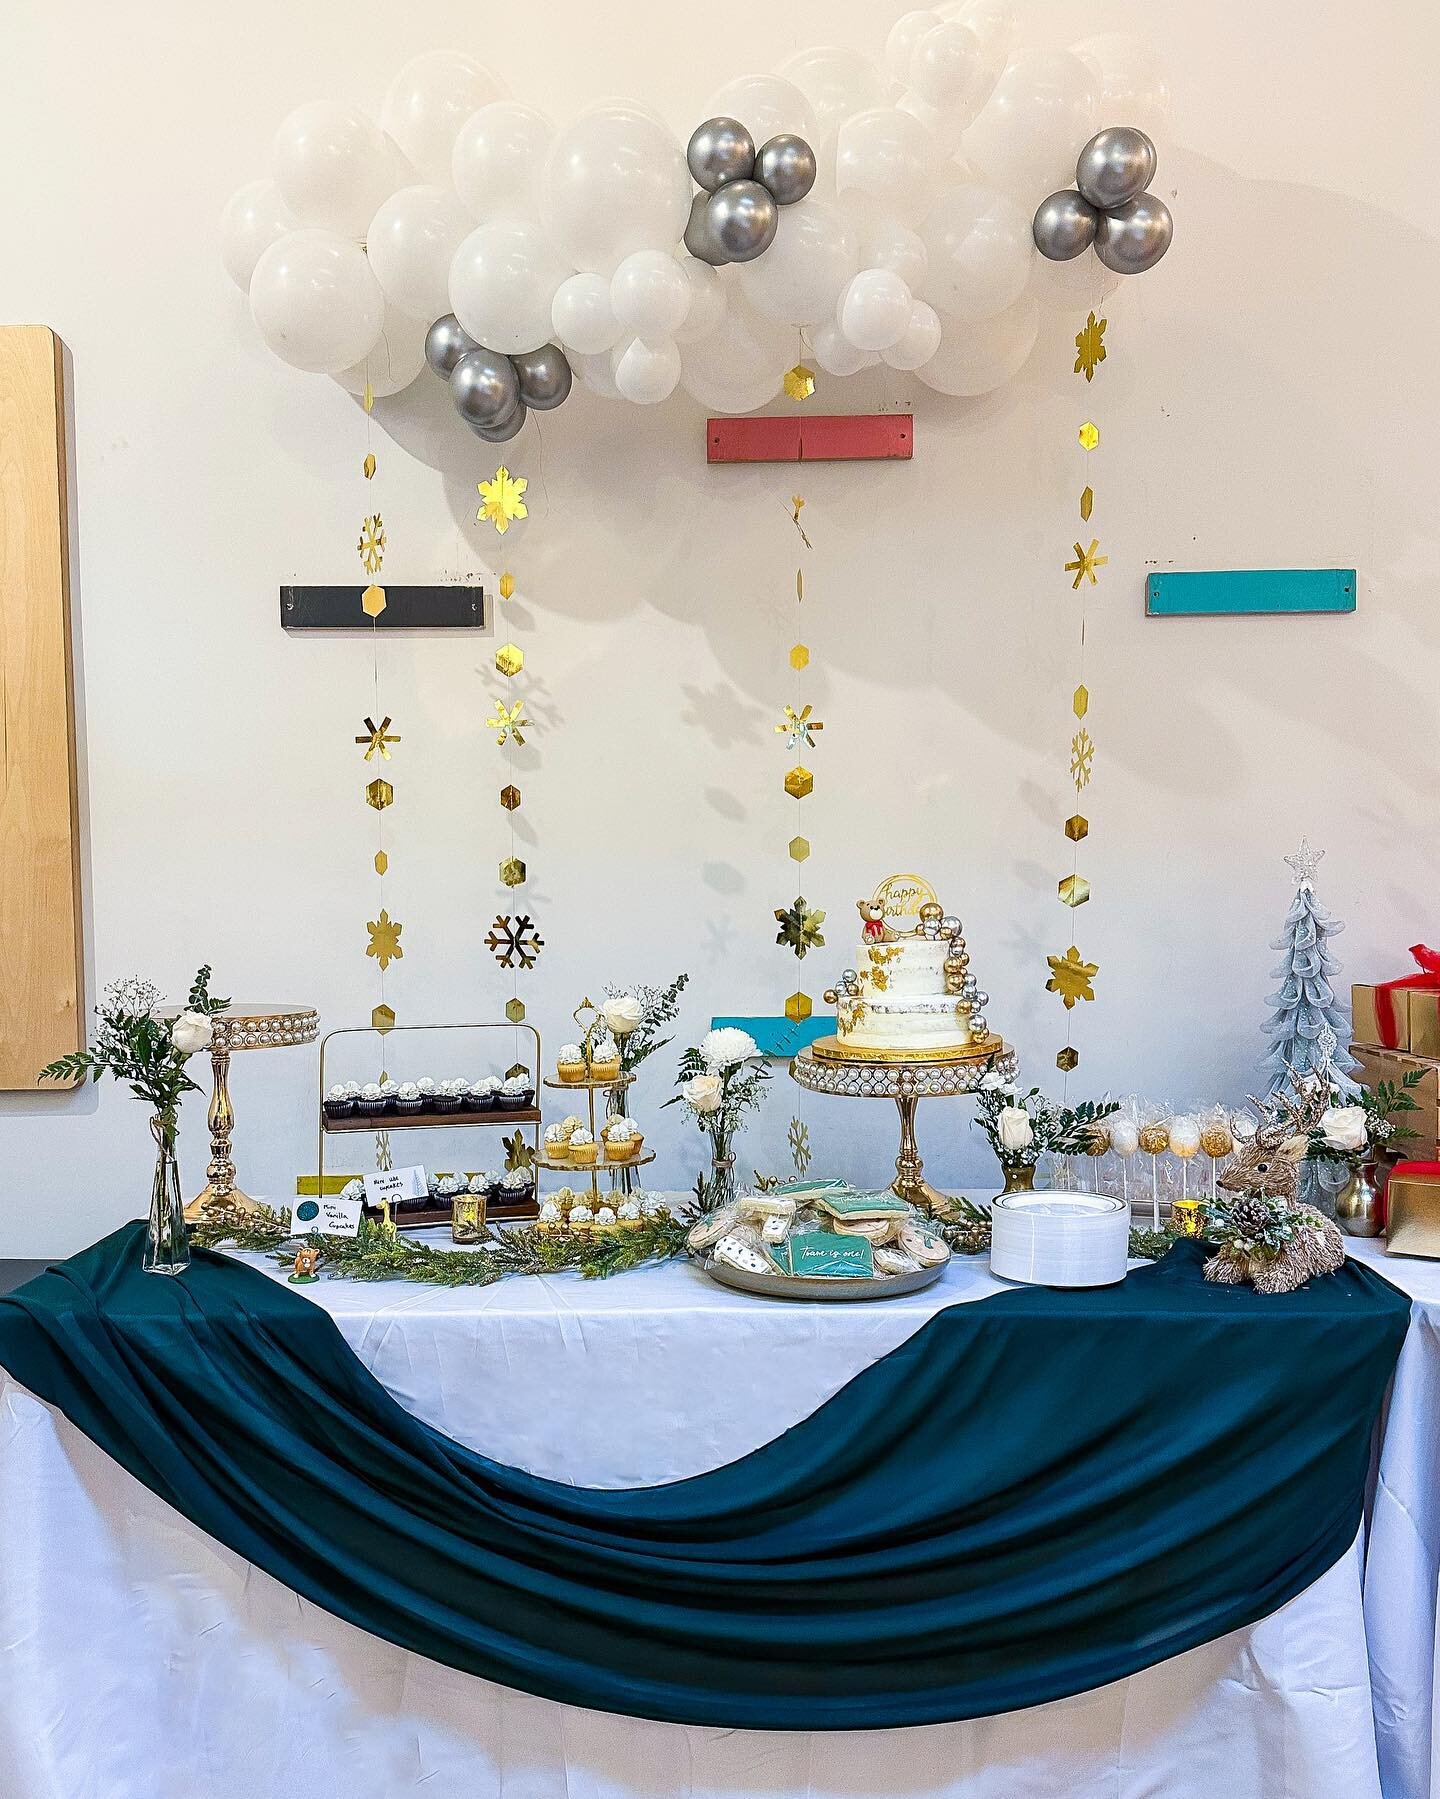 Throwback to Tvam's 1st Winter Wonderland Birthday last December.🎄✨

It's been a joy working with our client @aartiar for two consecutive years, celebrating her baby shower and Tvam's 1st birthday together ❤️.